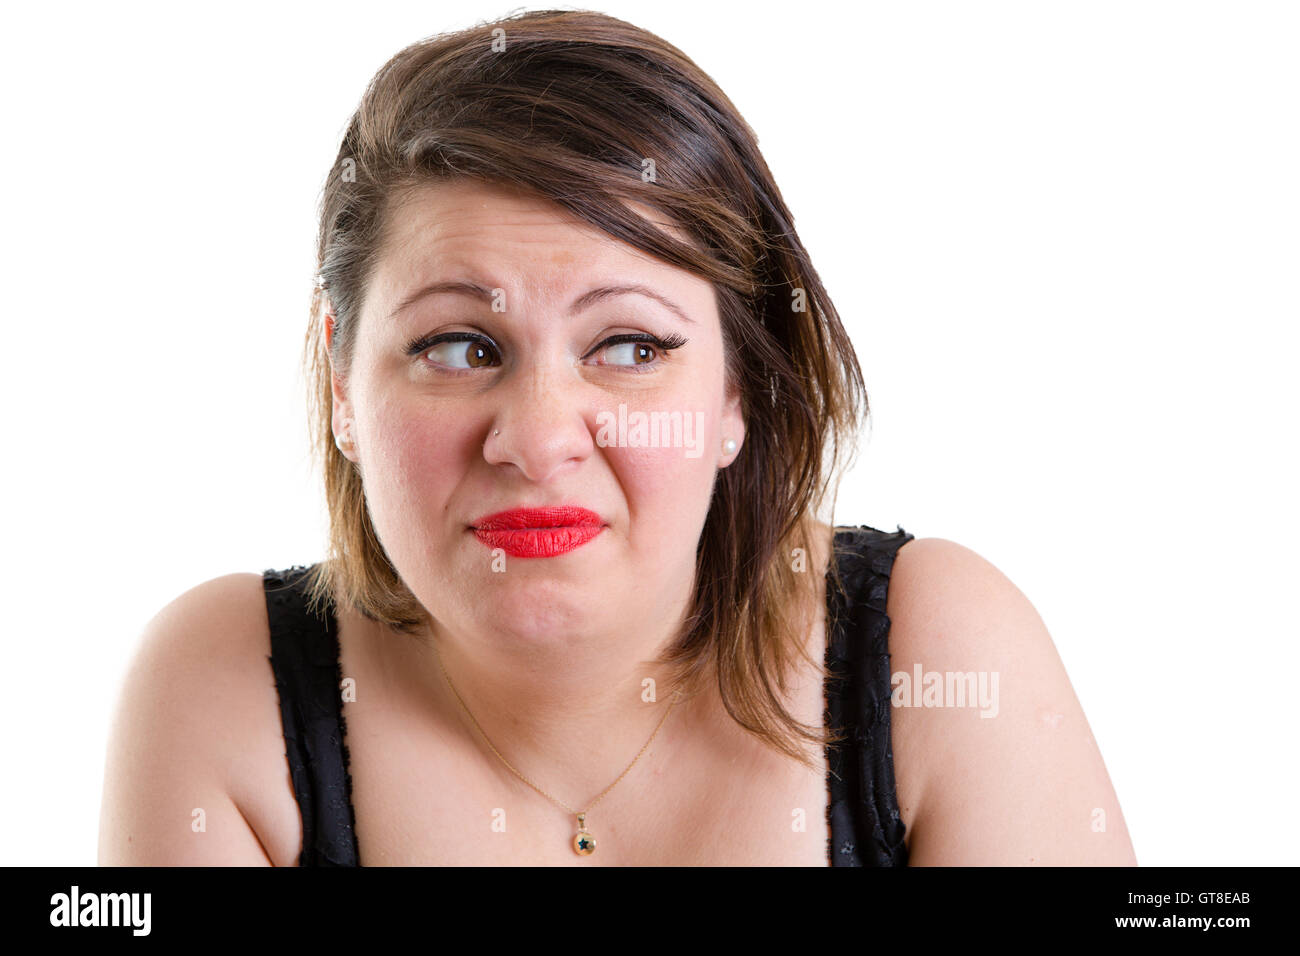 Expressive woman showing her revulsion and aversion glancing to the side with a frown and grimace as she hunches her shoulders, Stock Photo